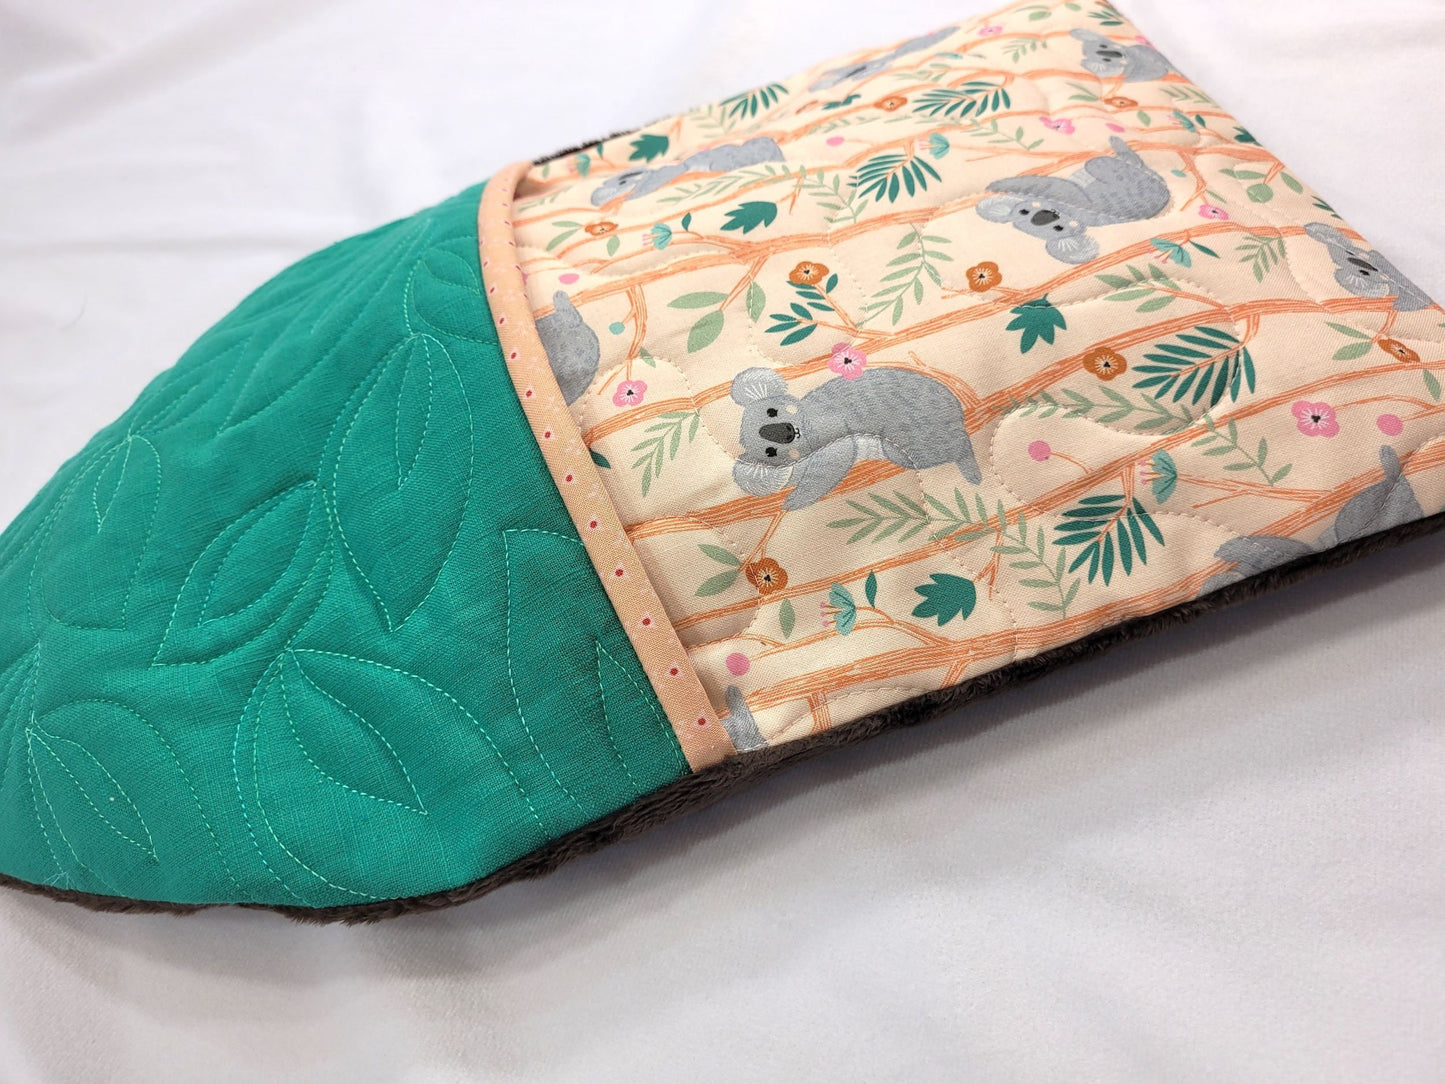 Quilted Hot Water Bottle Cover with Koala Bears, Soft Therapy Bottle Cover, Self Care Gift